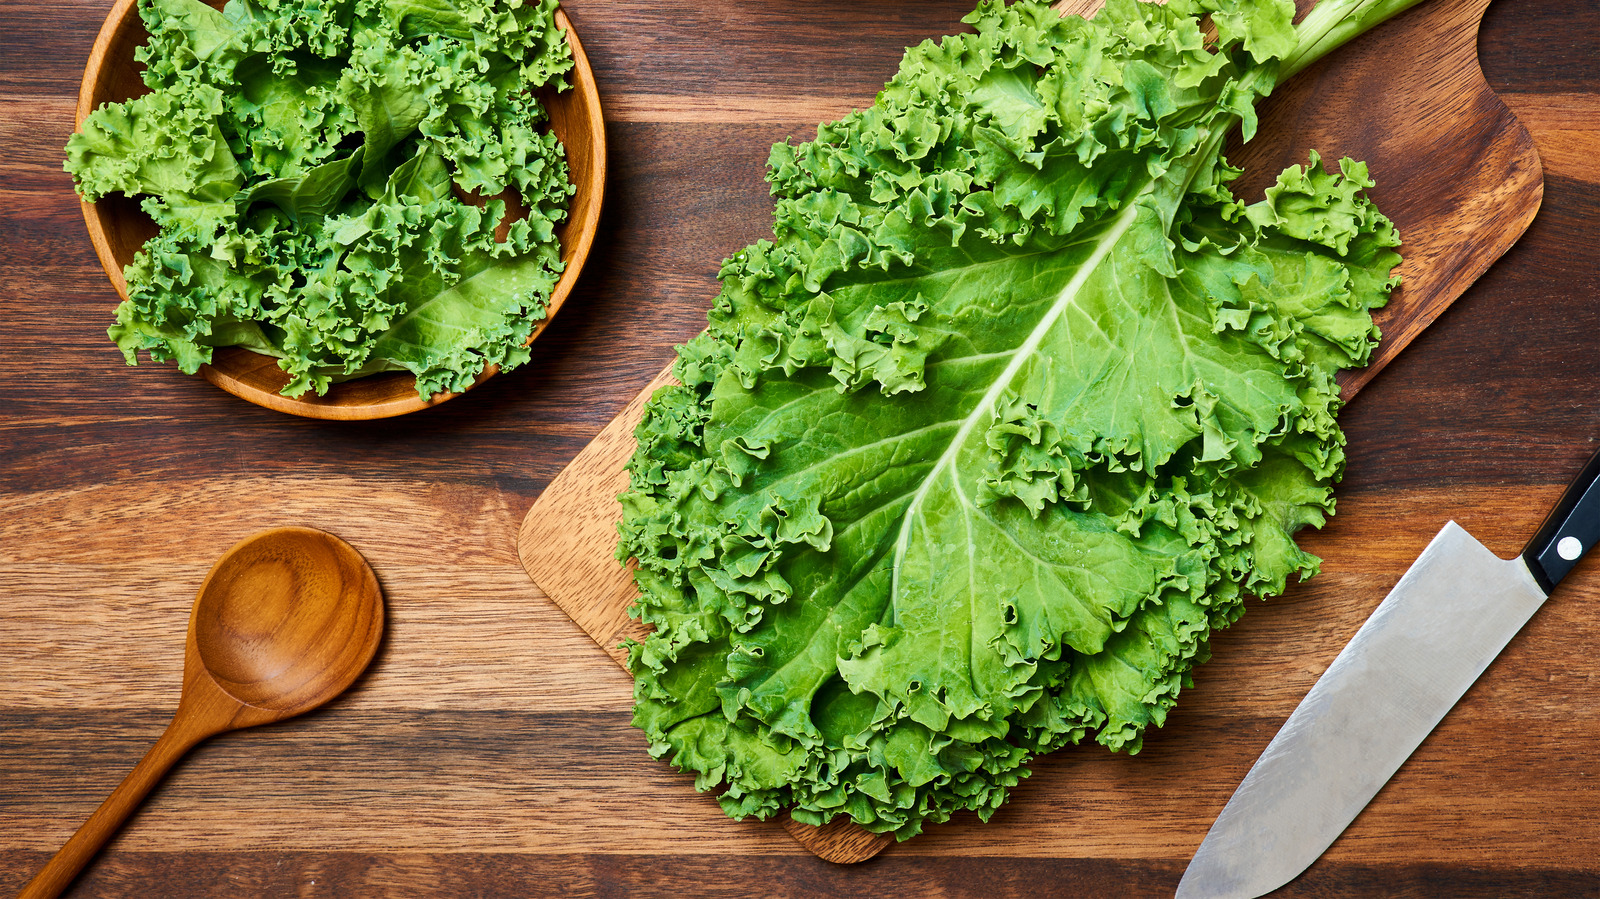 Common Mistakes That Are Ruining Your Greens, From Lettuce to Kale